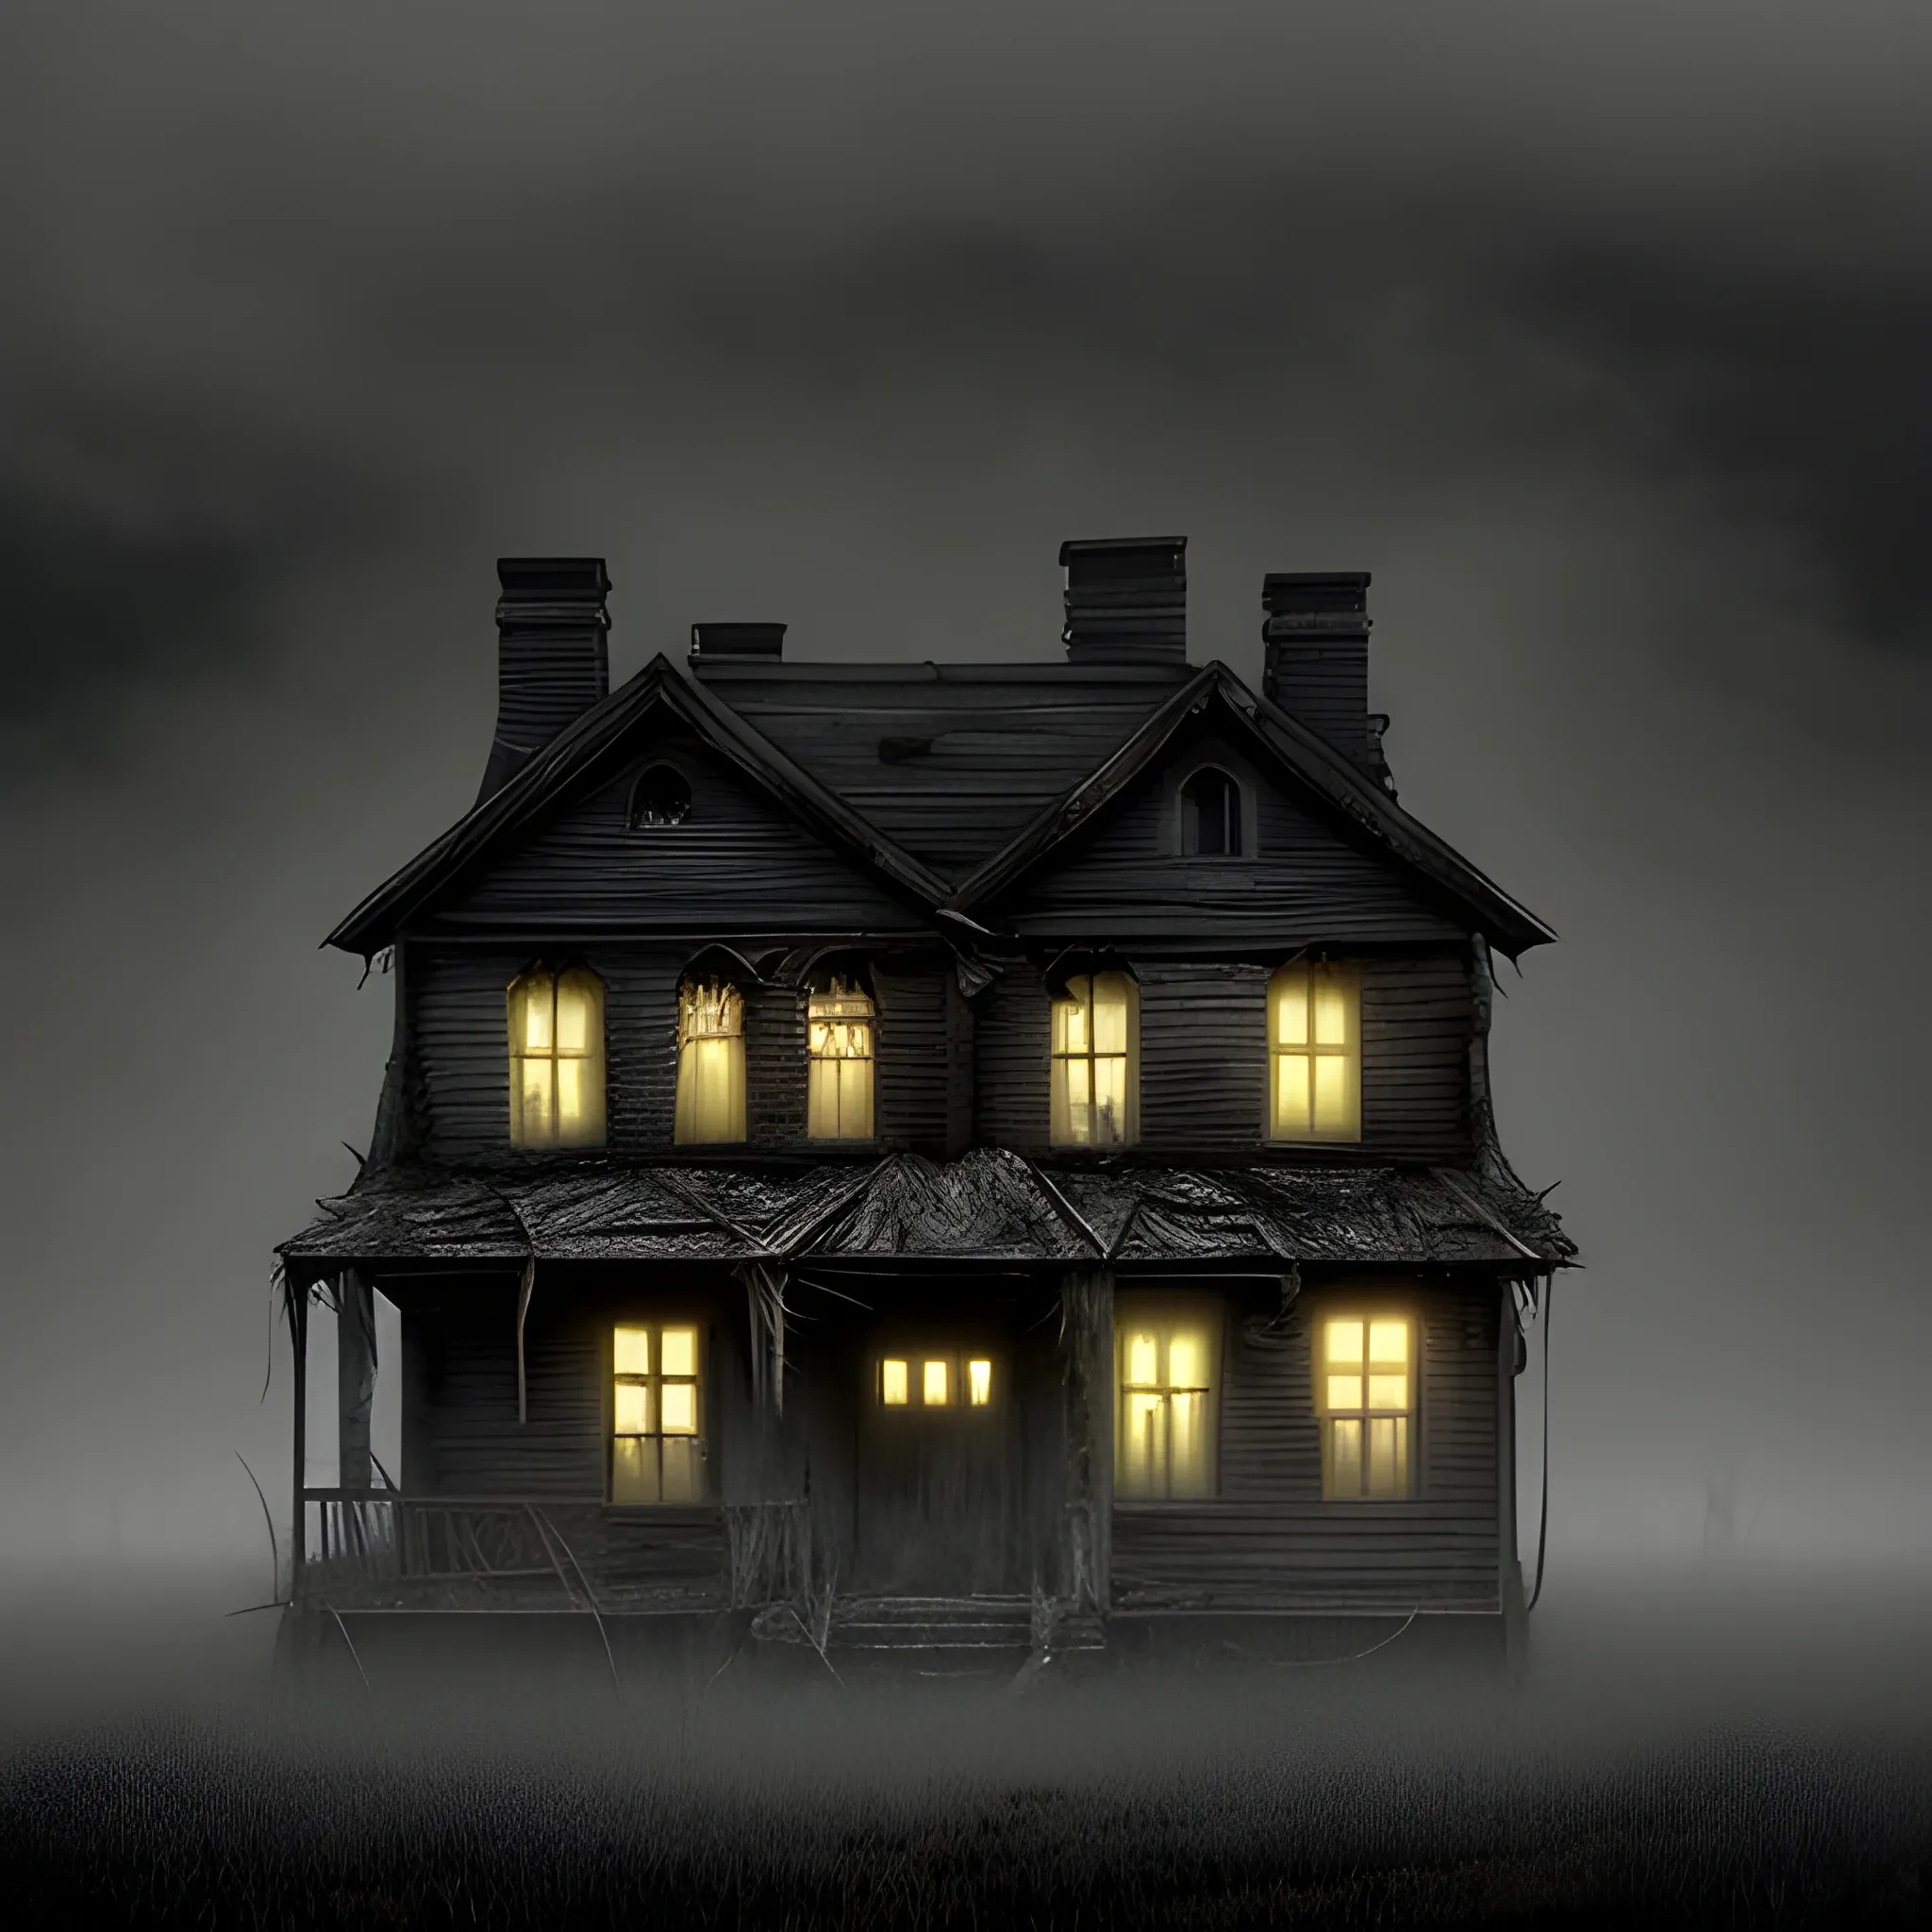 "An old, dilapidated house on a cold and rainy night, with a dark, ominous aura."
"A haunted house at the outskirts of town, surrounded by fog and tall, dead trees."
ugly, 

deformed, 

noisy, 

blurry, 

distorted, 




